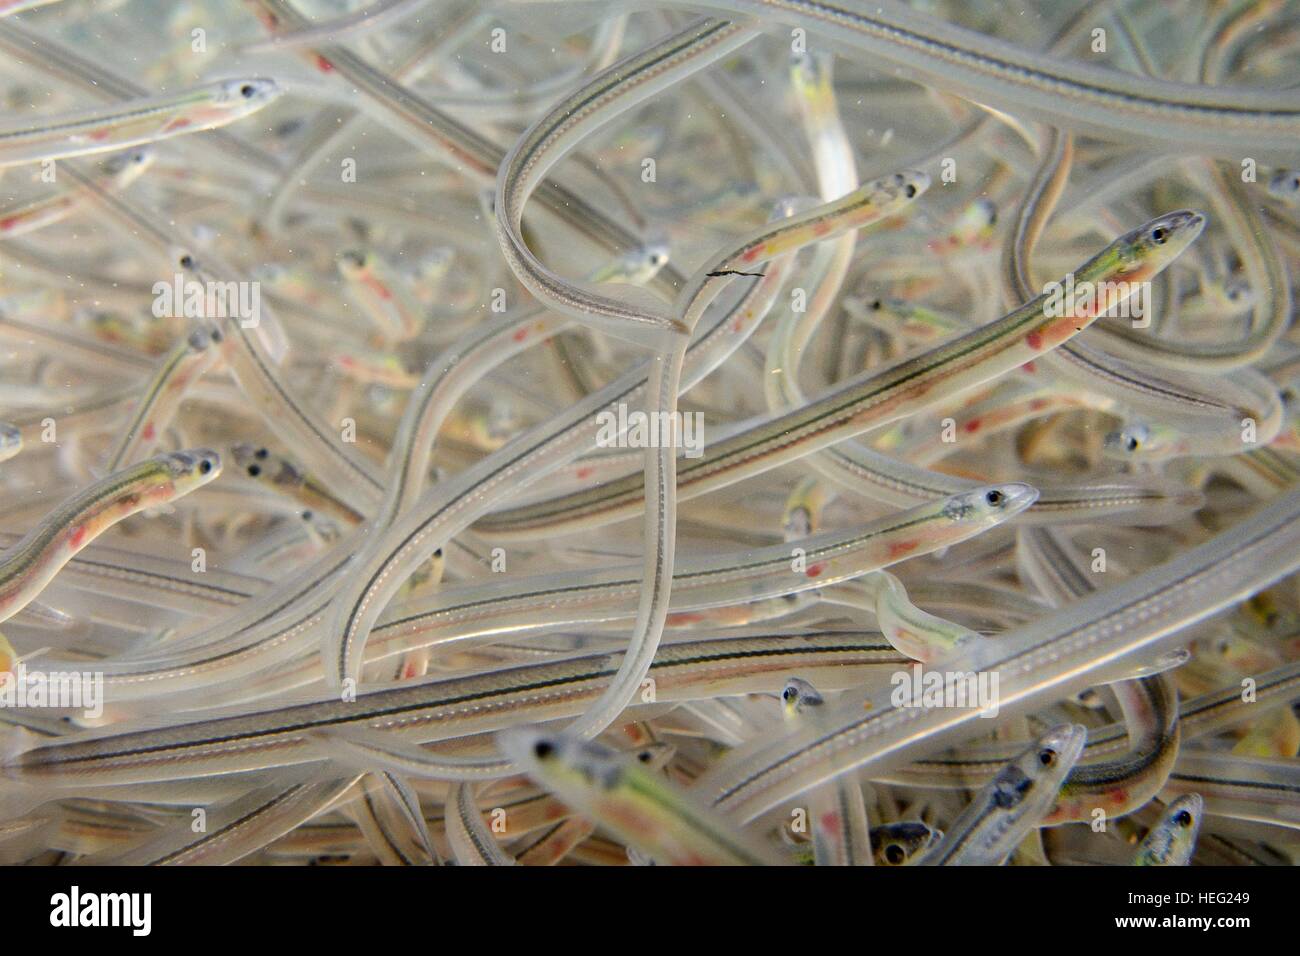 Young European eel (Anguilla anguilla) elvers, or glass eels for reintroductions swimming in a large holding tank, Gloucester UK Stock Photo